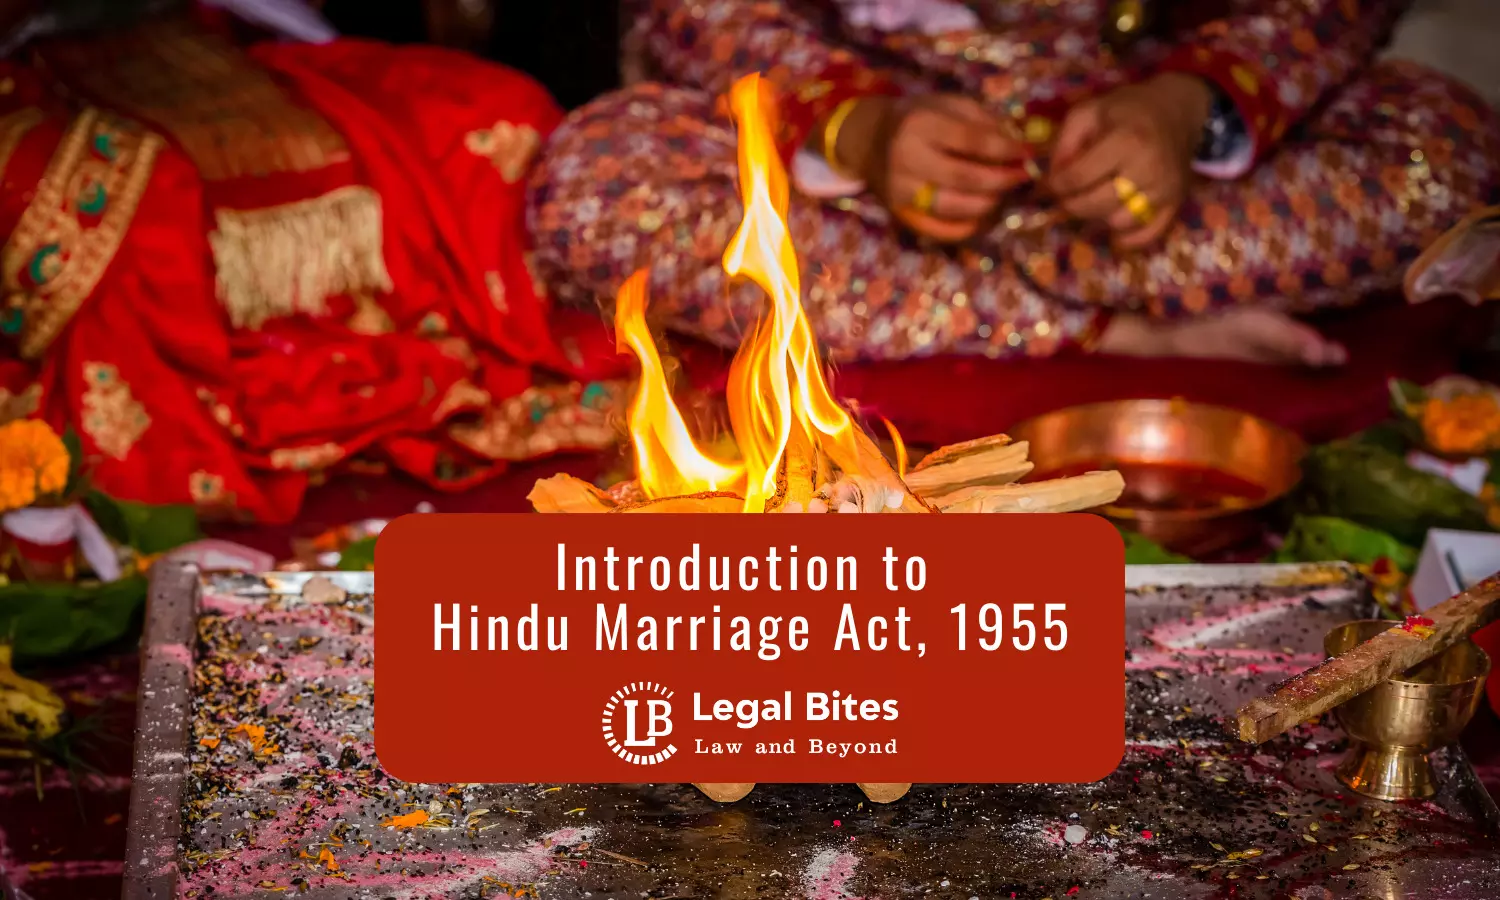 Introduction to Hindu Marriage Act, 1955